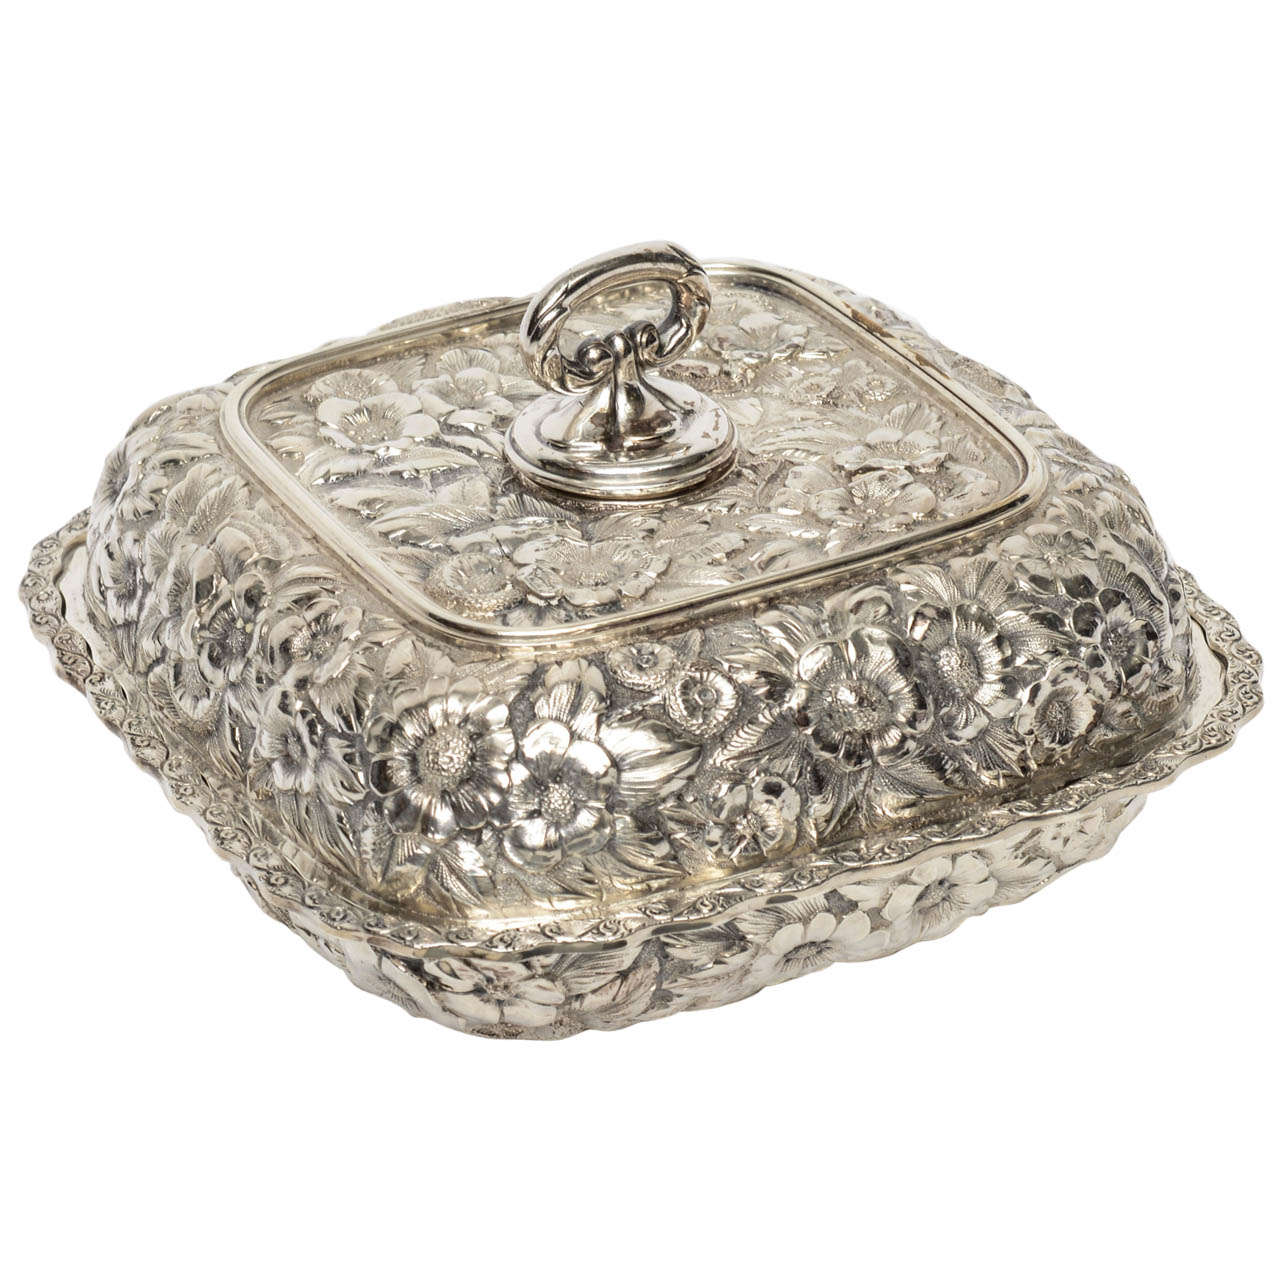 Sterling Silver Covered Dish, Late 19th Century